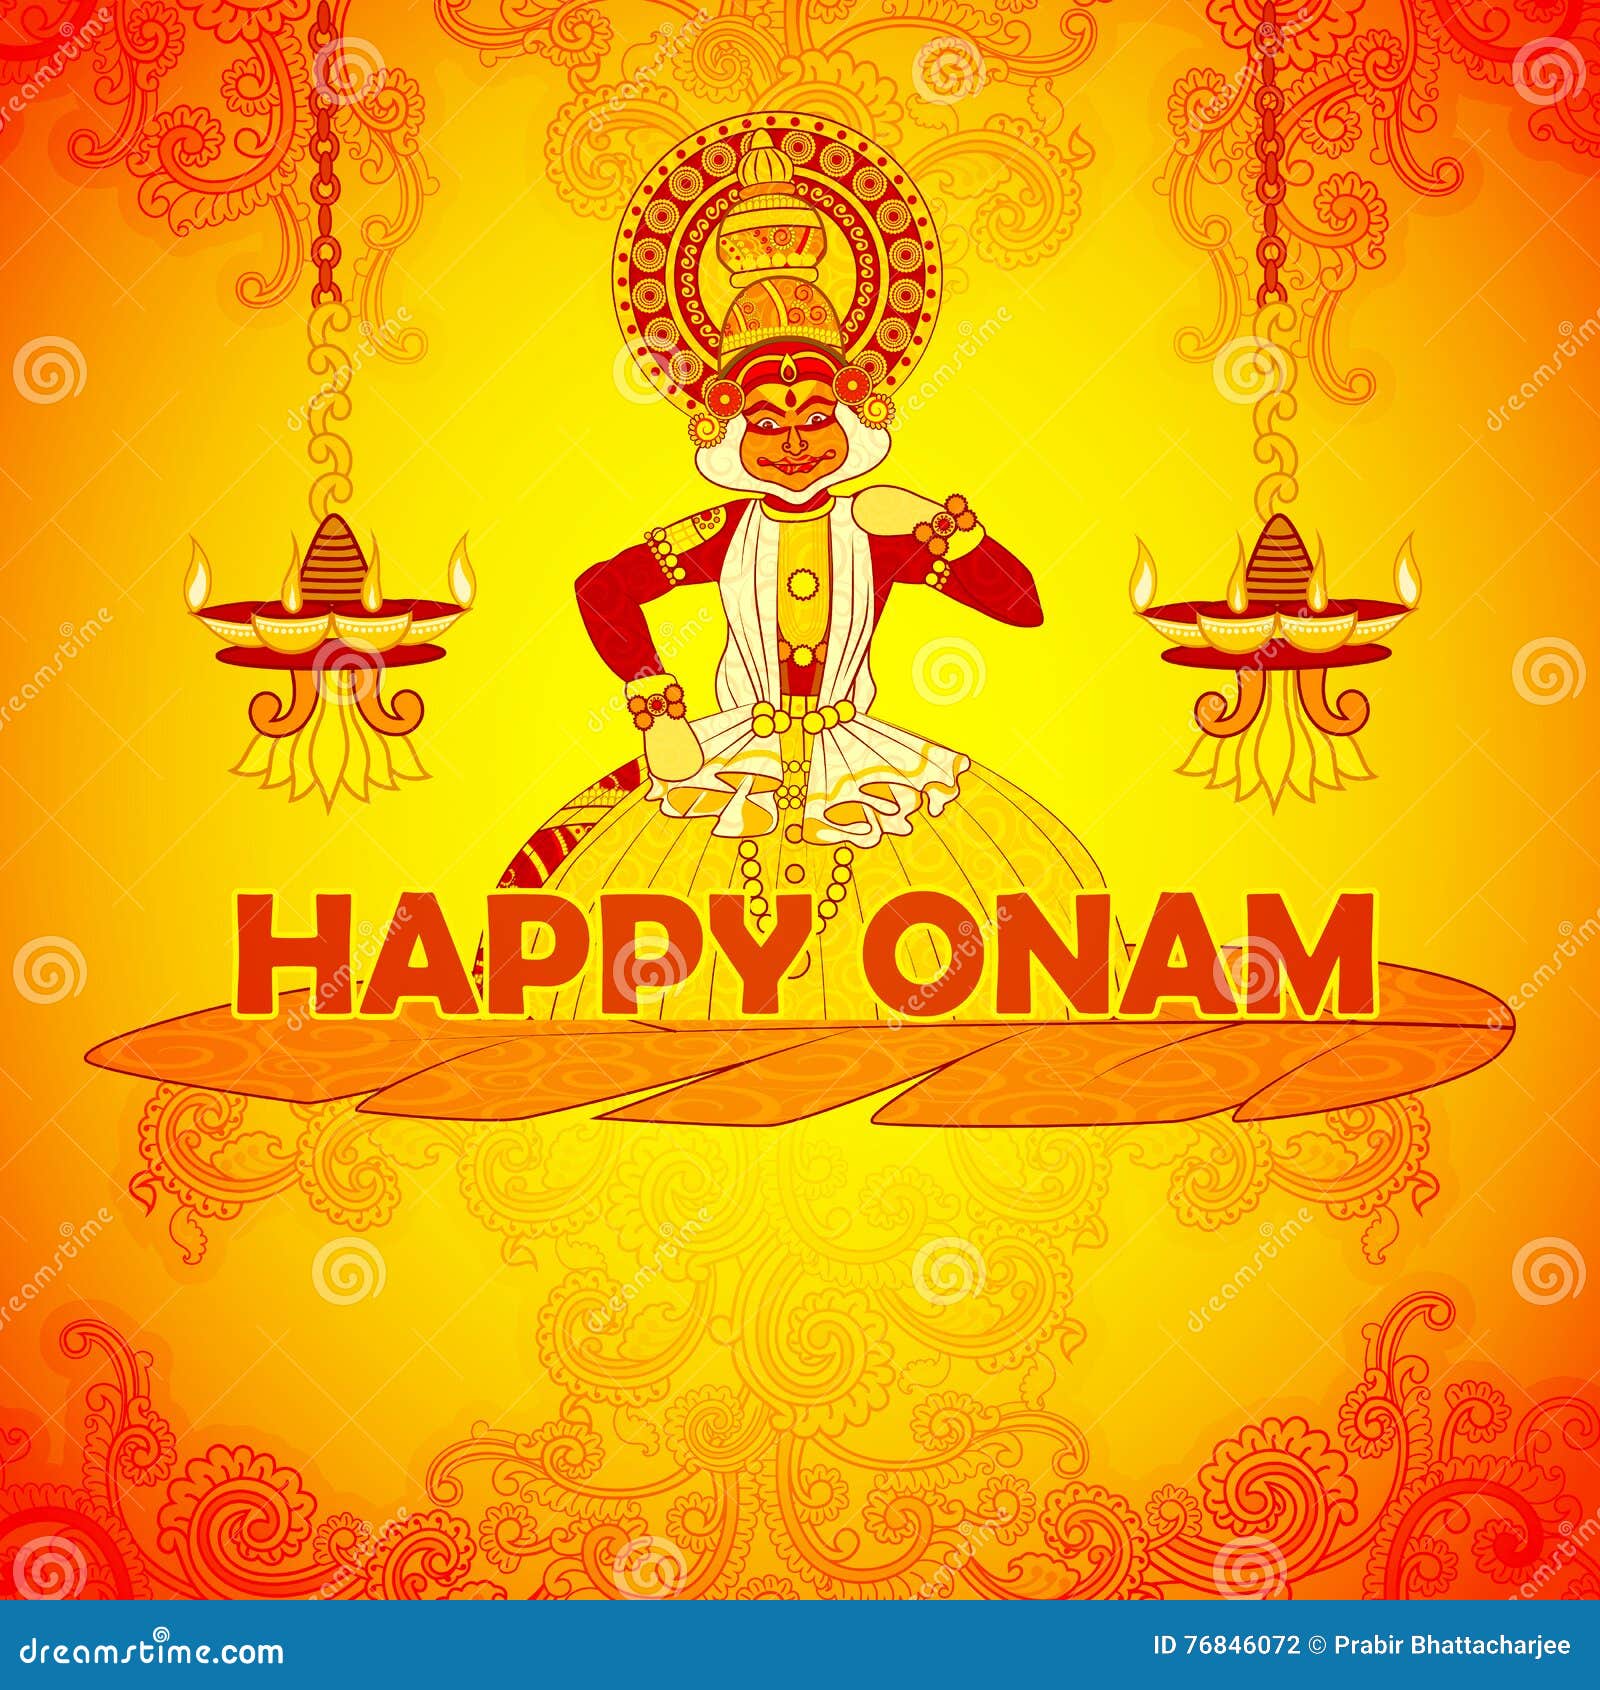 Happy Onam Background in Indian Art Style Stock Vector - Illustration of  kerala, boating: 76846072